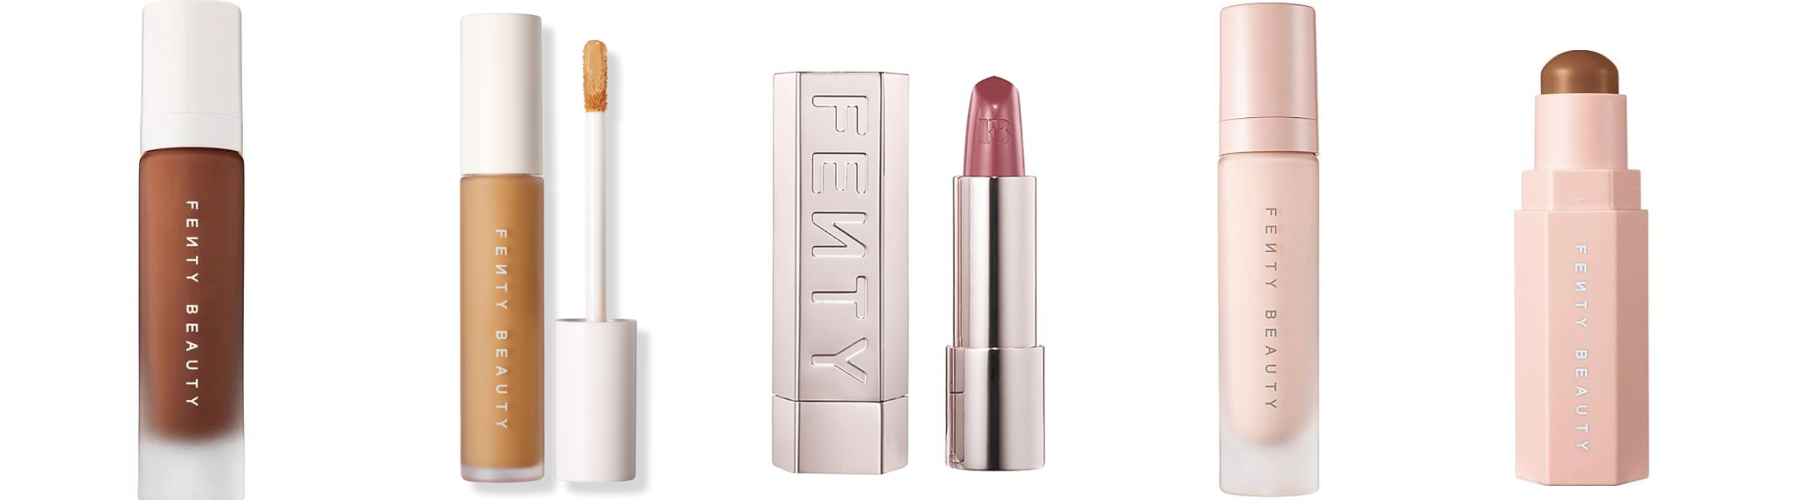 Get the perfect Fenty look with these must-have beauty products